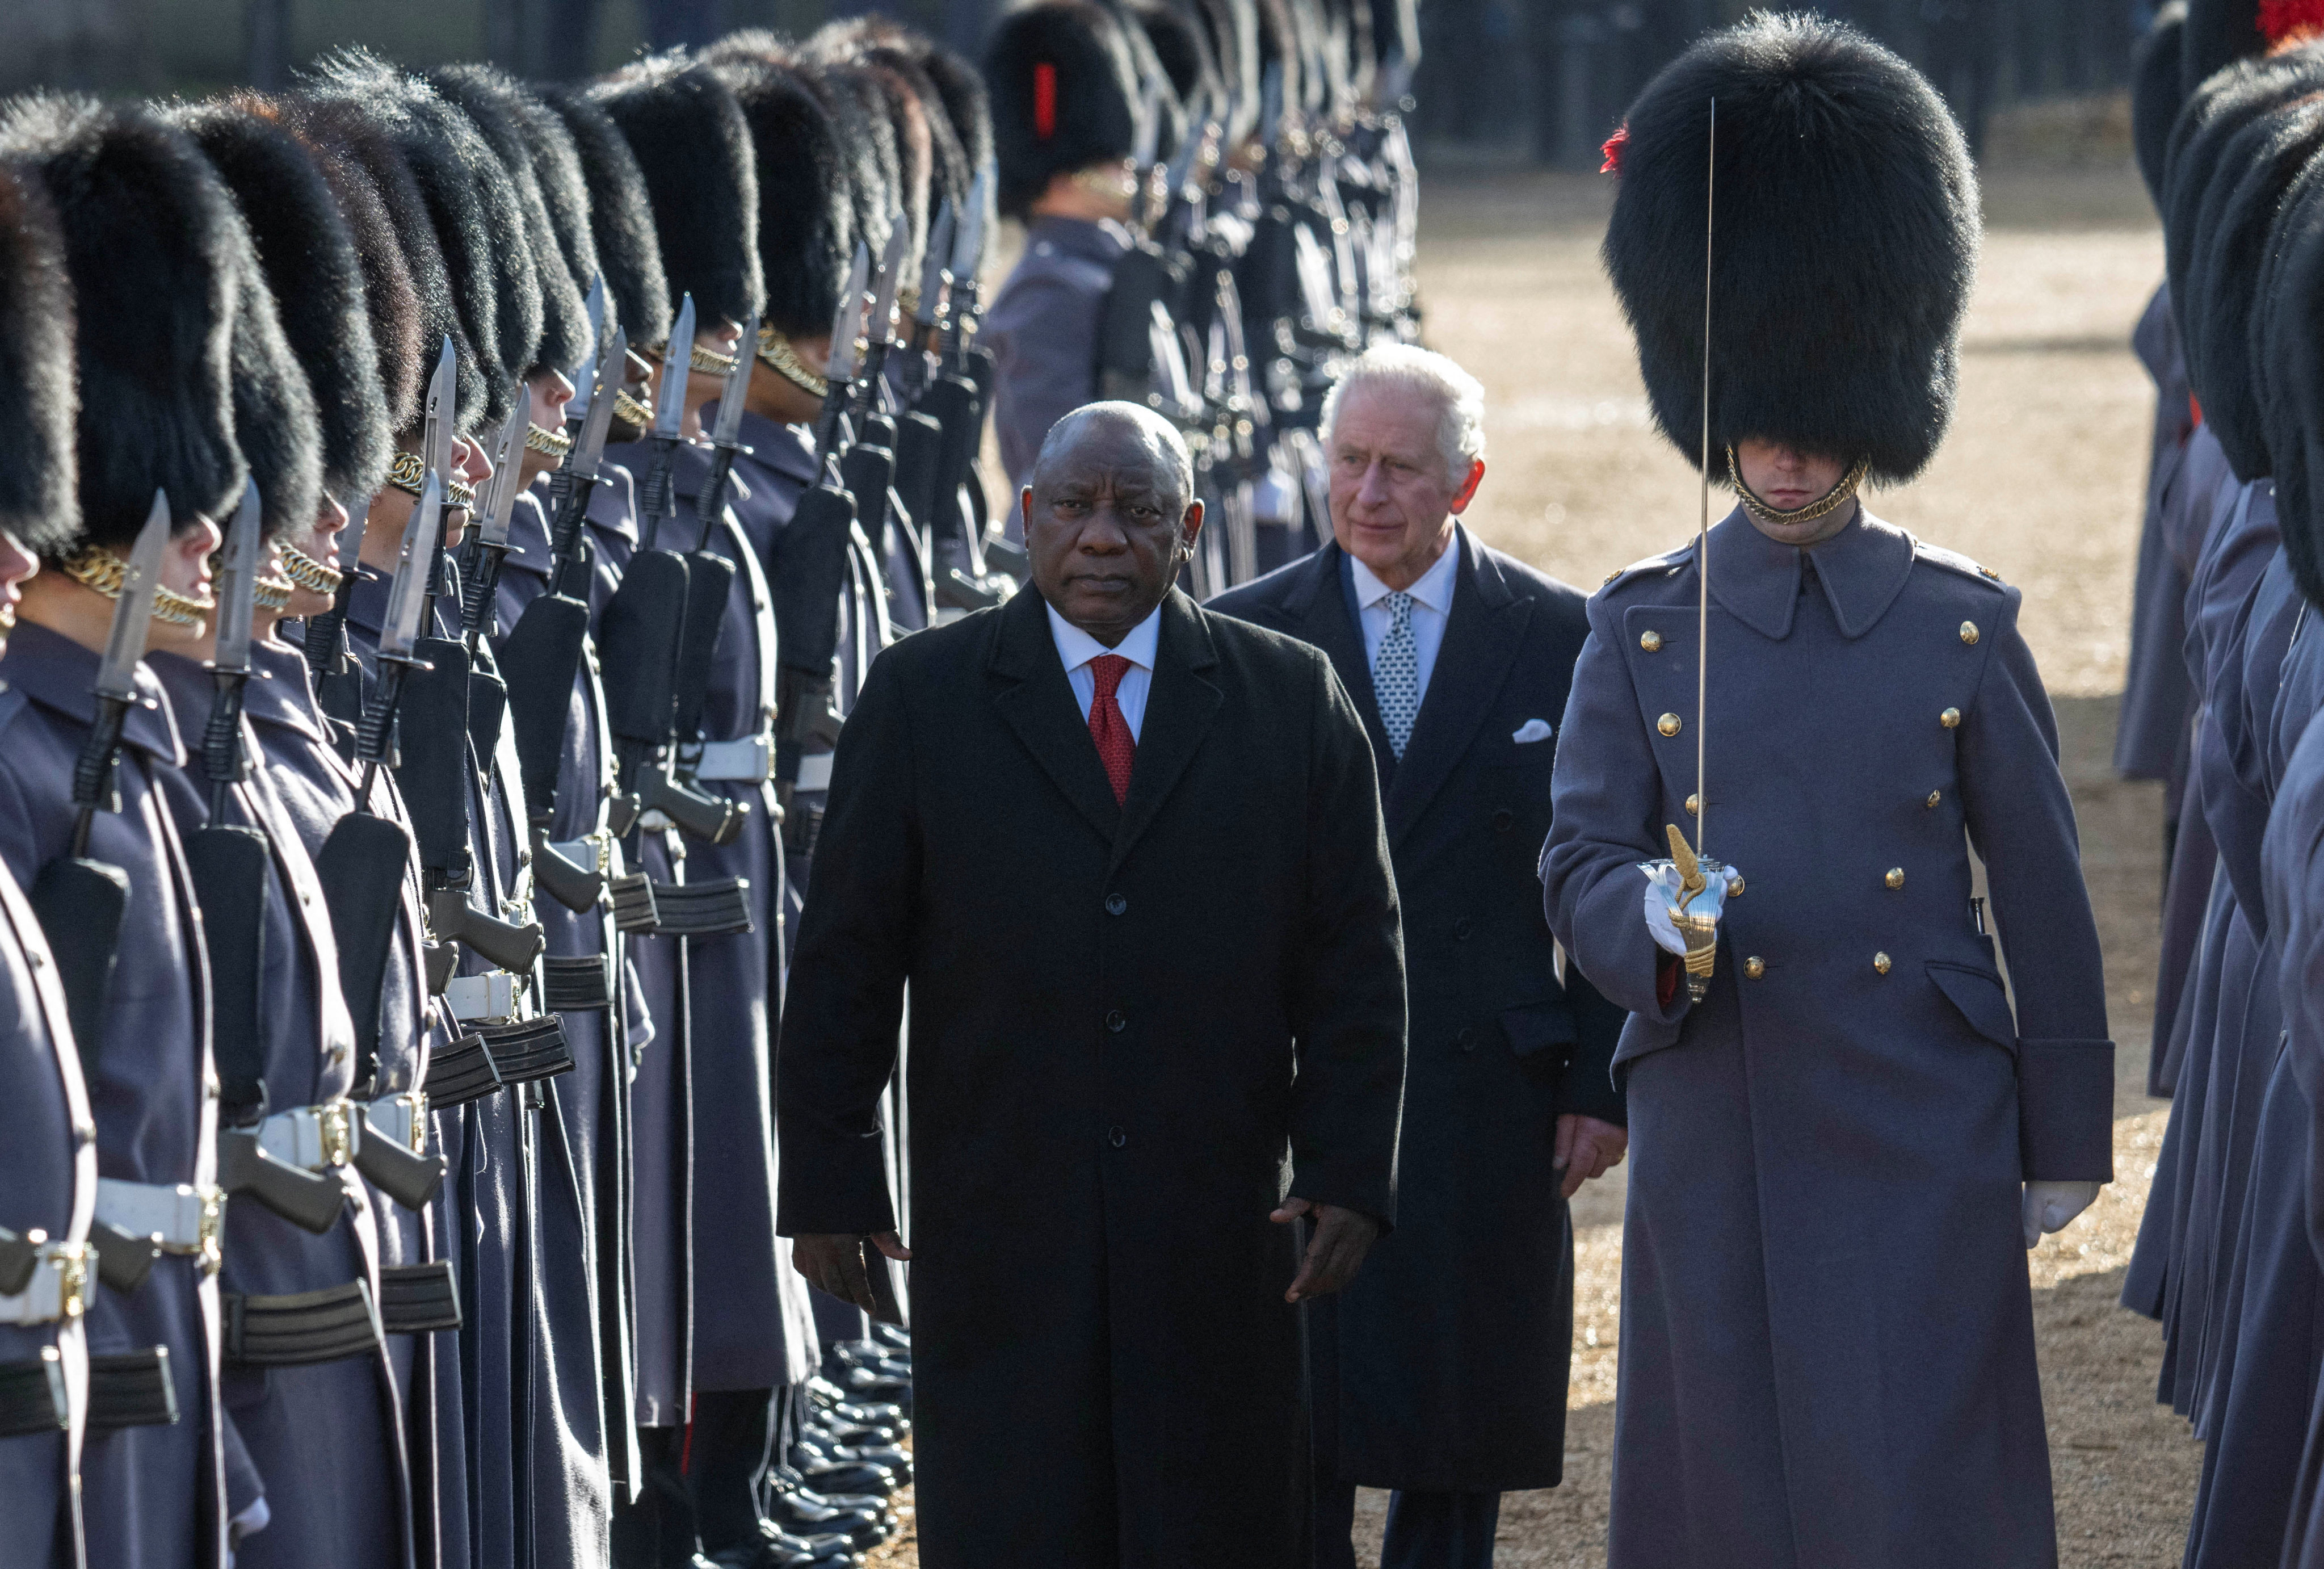 Britain’s King Charles walks with the President of South Africa Cyril Ramaphosa at a Ceremonial Welcome in London on Tuesday. Photo: Reuters